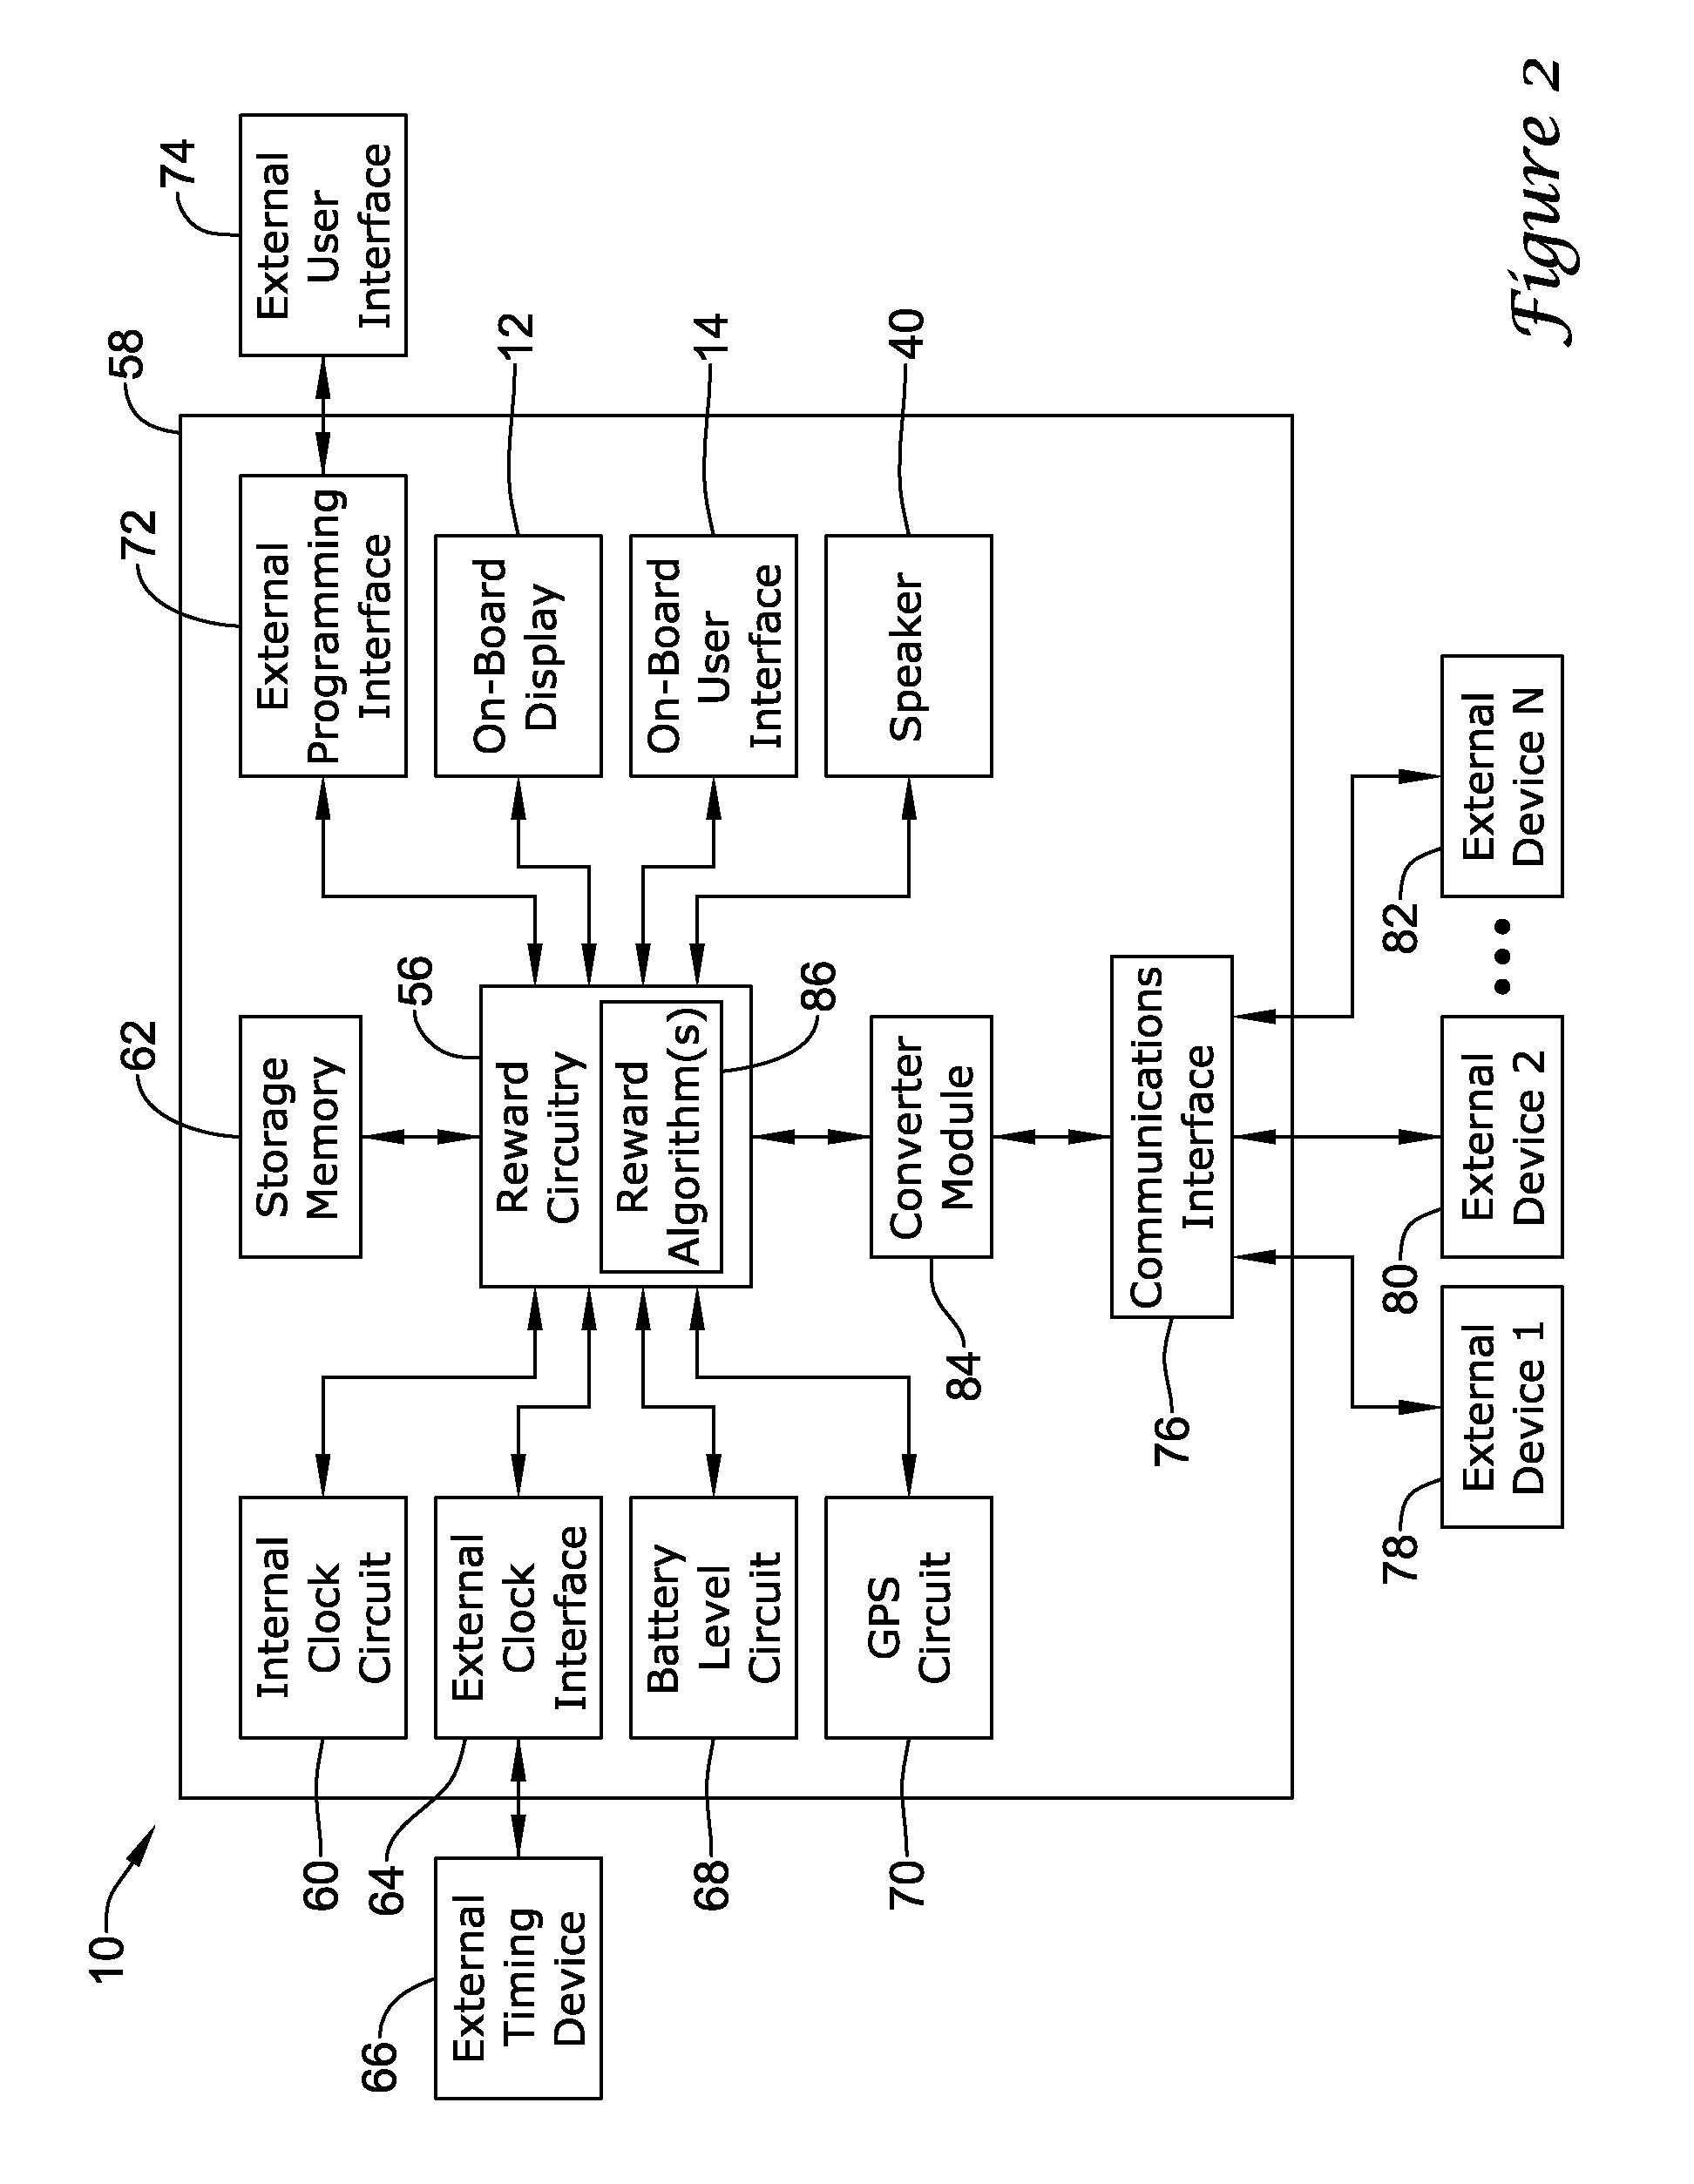 Combined peripheral and health monitoring devices